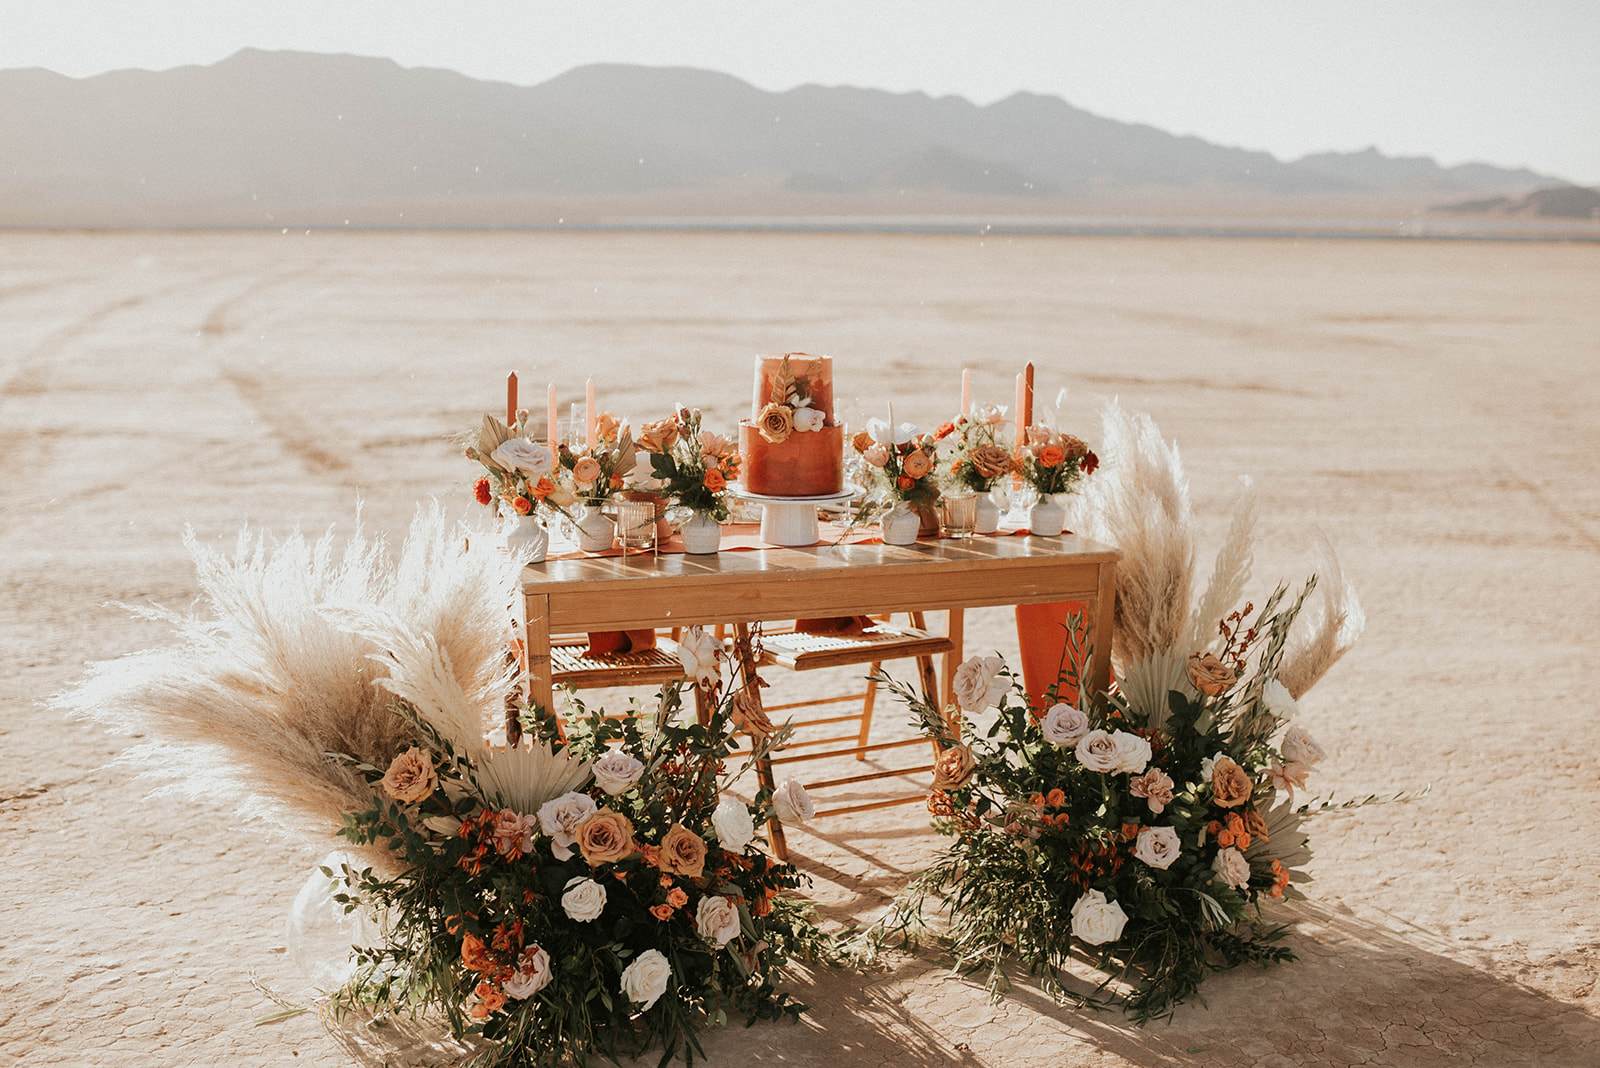 First Stop! A Little White Chapel sweetheart table decorated with bright orange boho styled florals and two tiered cake. Two ground floral arches decorate each side of the table. A deep burnt orange runner lays across the wooden table. 